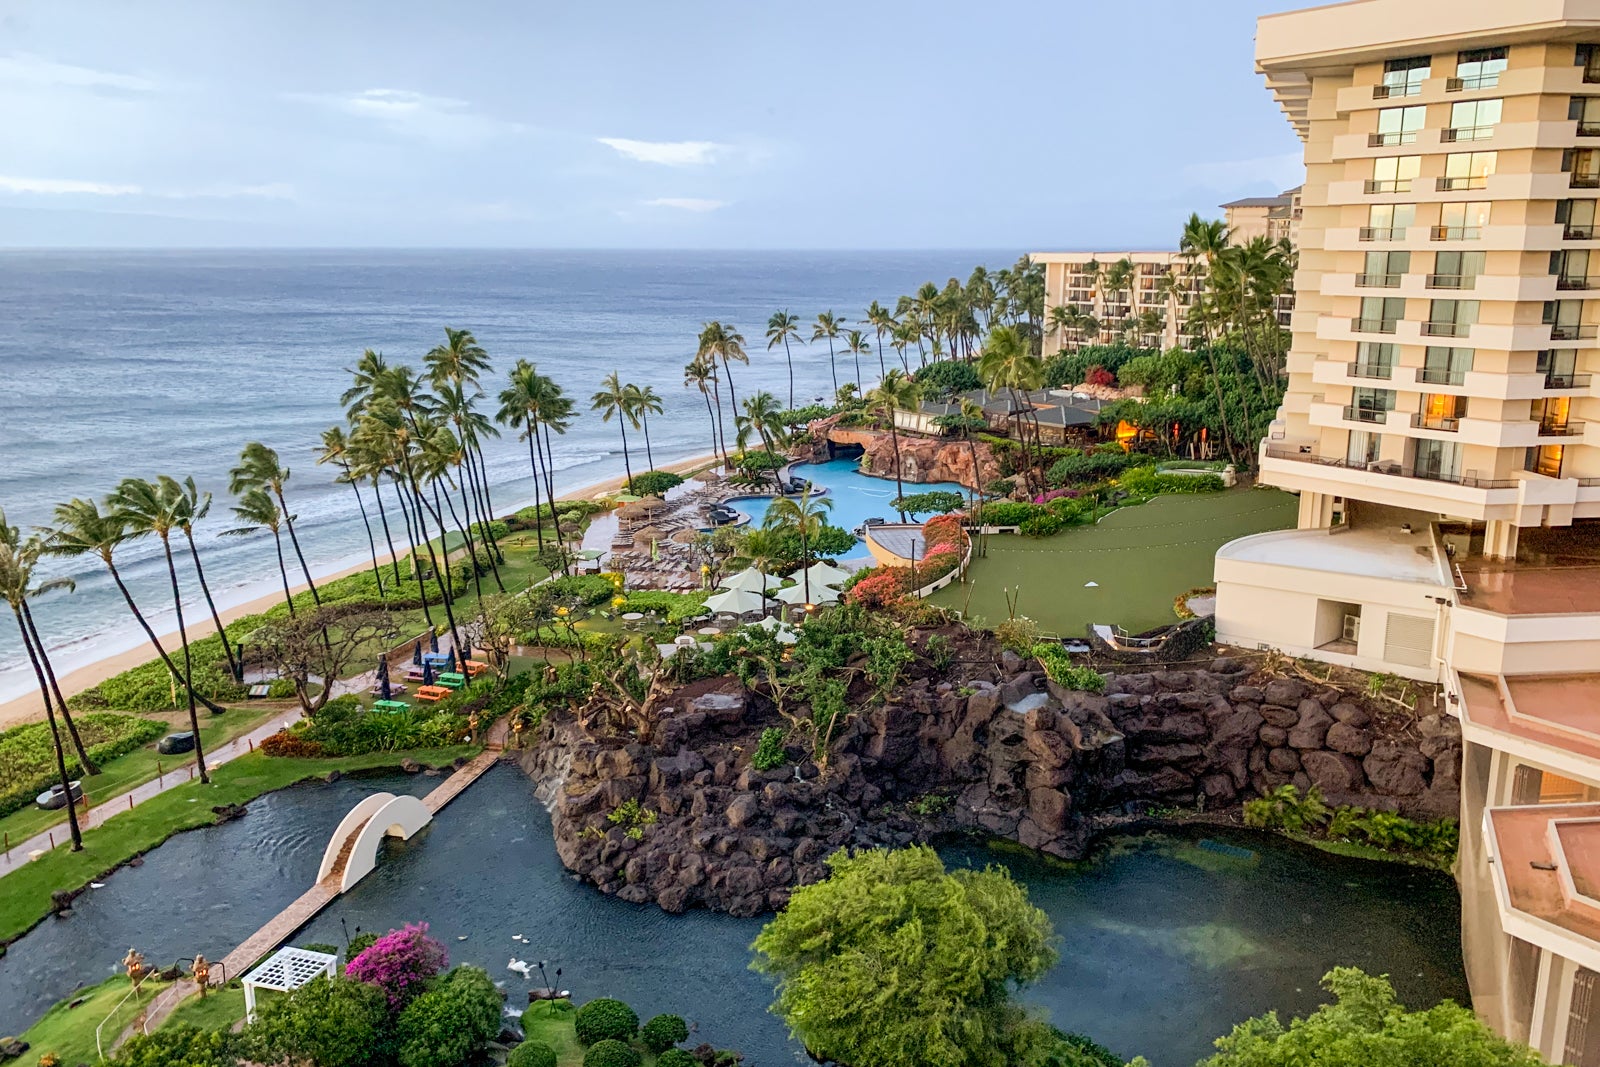 Sweet Spot Sunday: How to fly to Hawaii for 20,000 miles and $11.20 round-trip